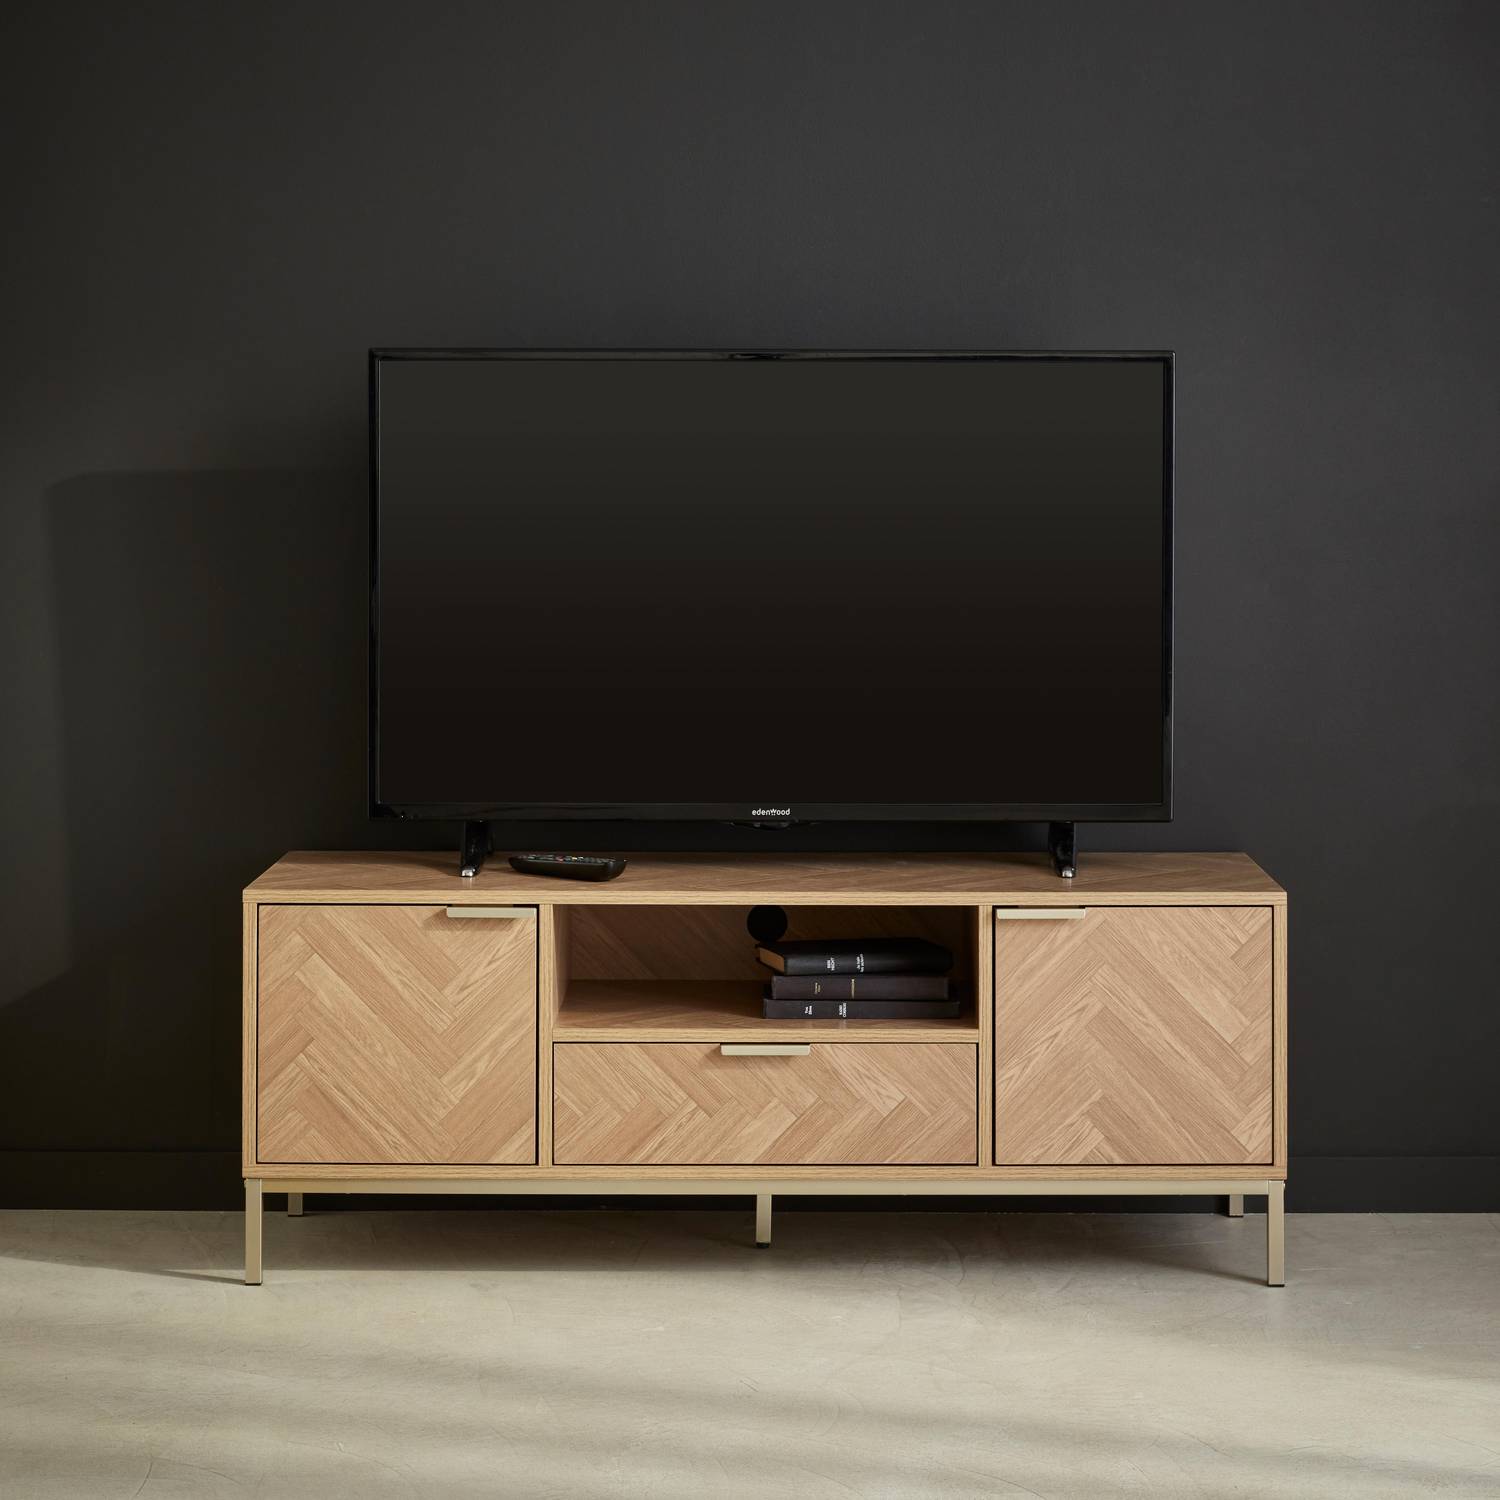 TV stand with a herringbone pattern on the doors or drawers